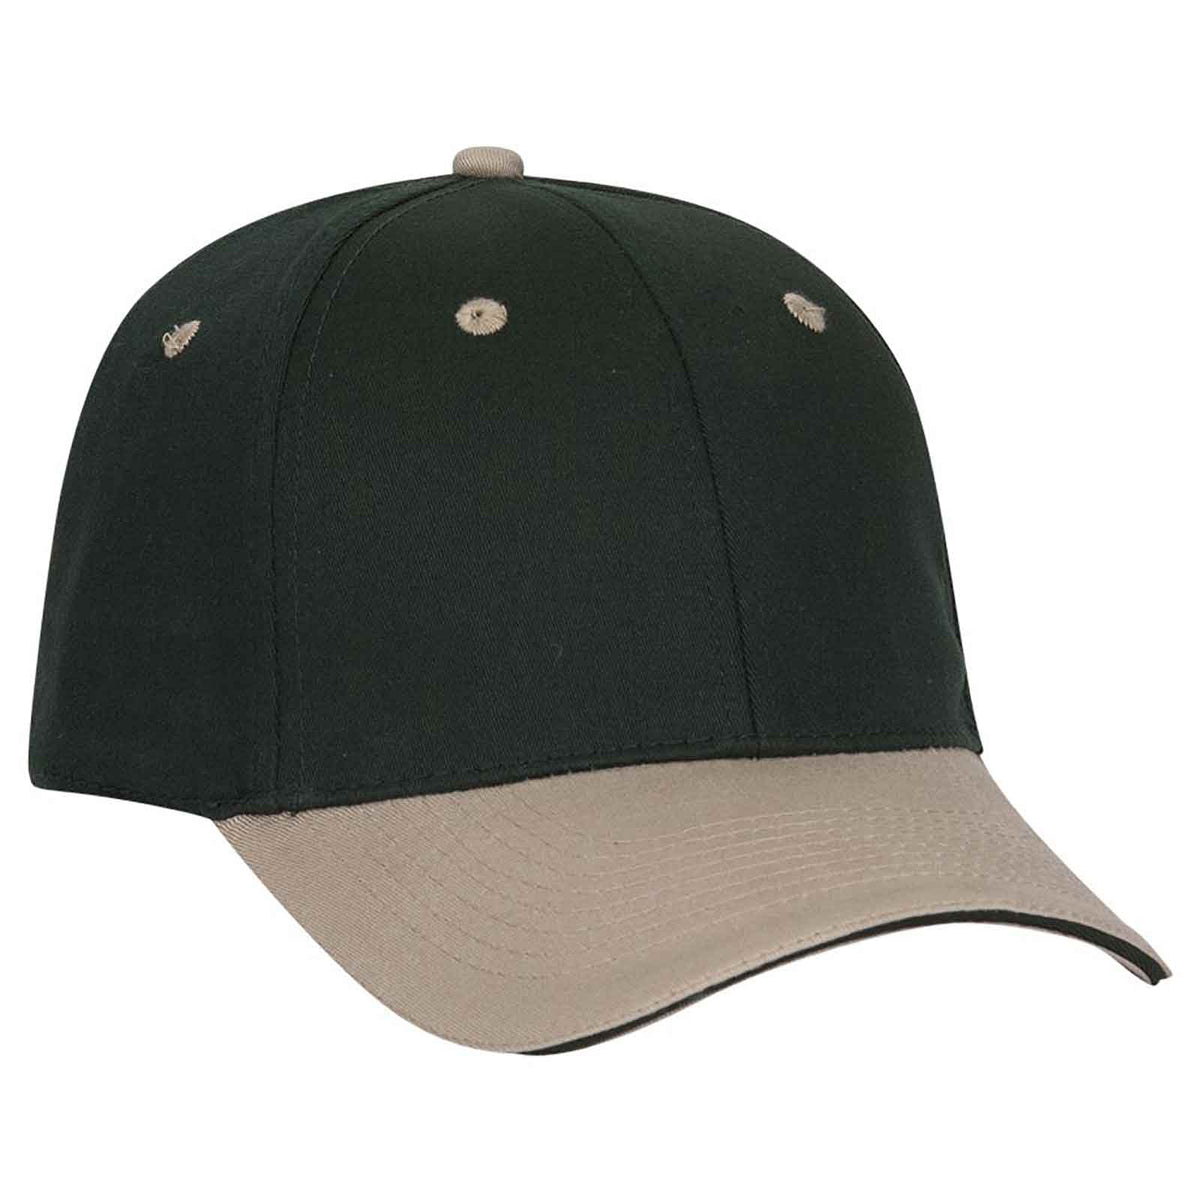 OTTO 12-267 Stretchable Deluxe Brushed Cotton Twill Sandwich Visor Low Profile Pro Style Cap S/M - Khaki Dark Green Dark Green - HIT a Double - 1